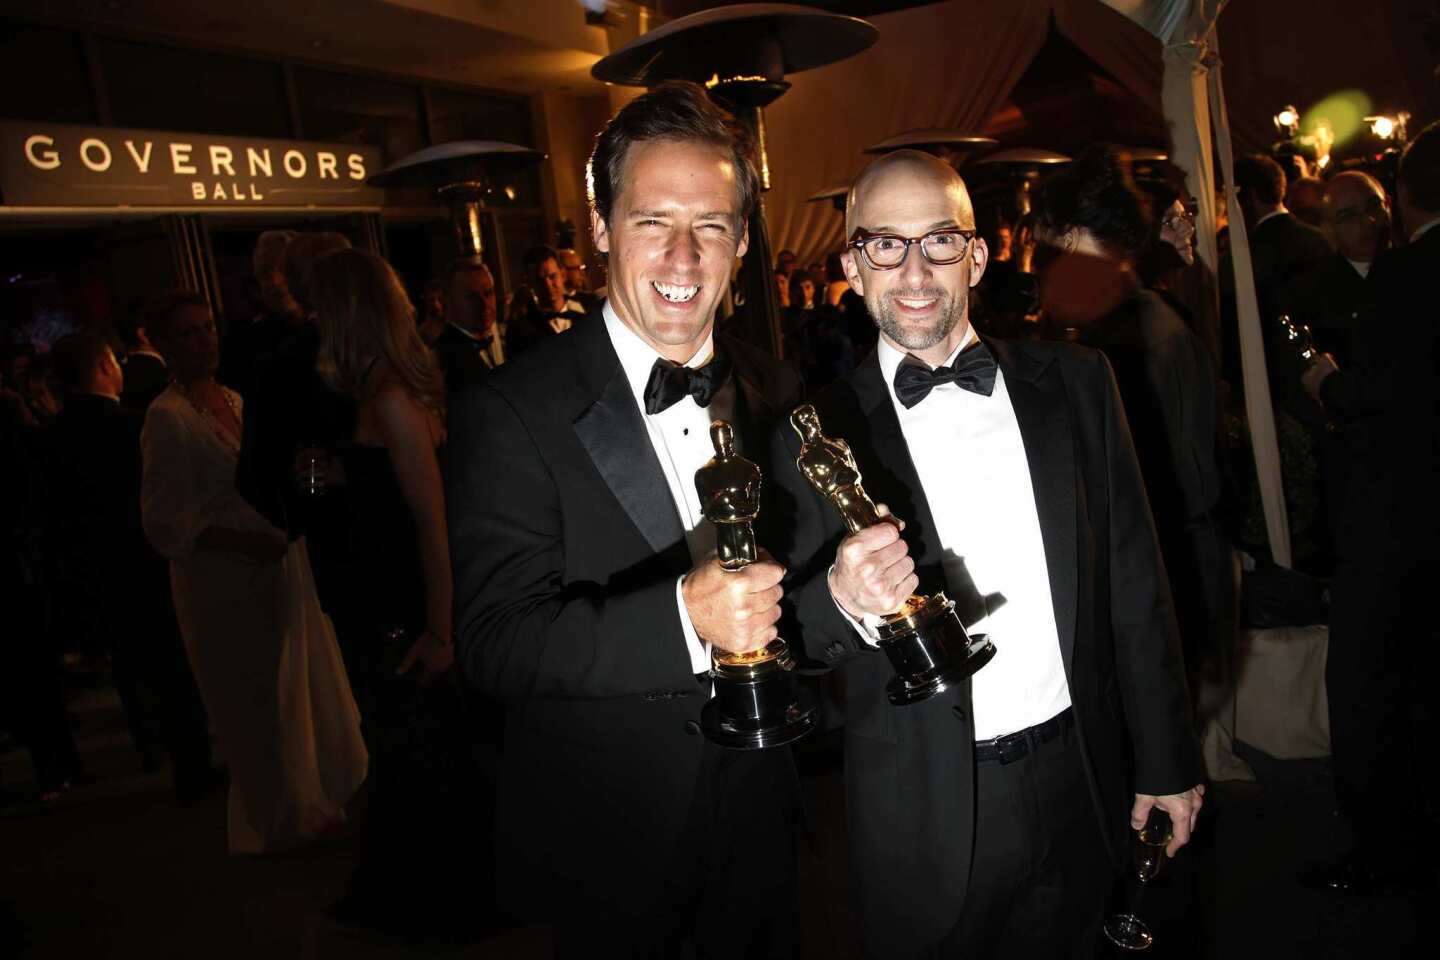 Nat Faxon, left, and Jim Rash hold their Oscars for best adapted screenplay for "The Descendants" outside the Governors Ball at the Hollywood & Highland complex.